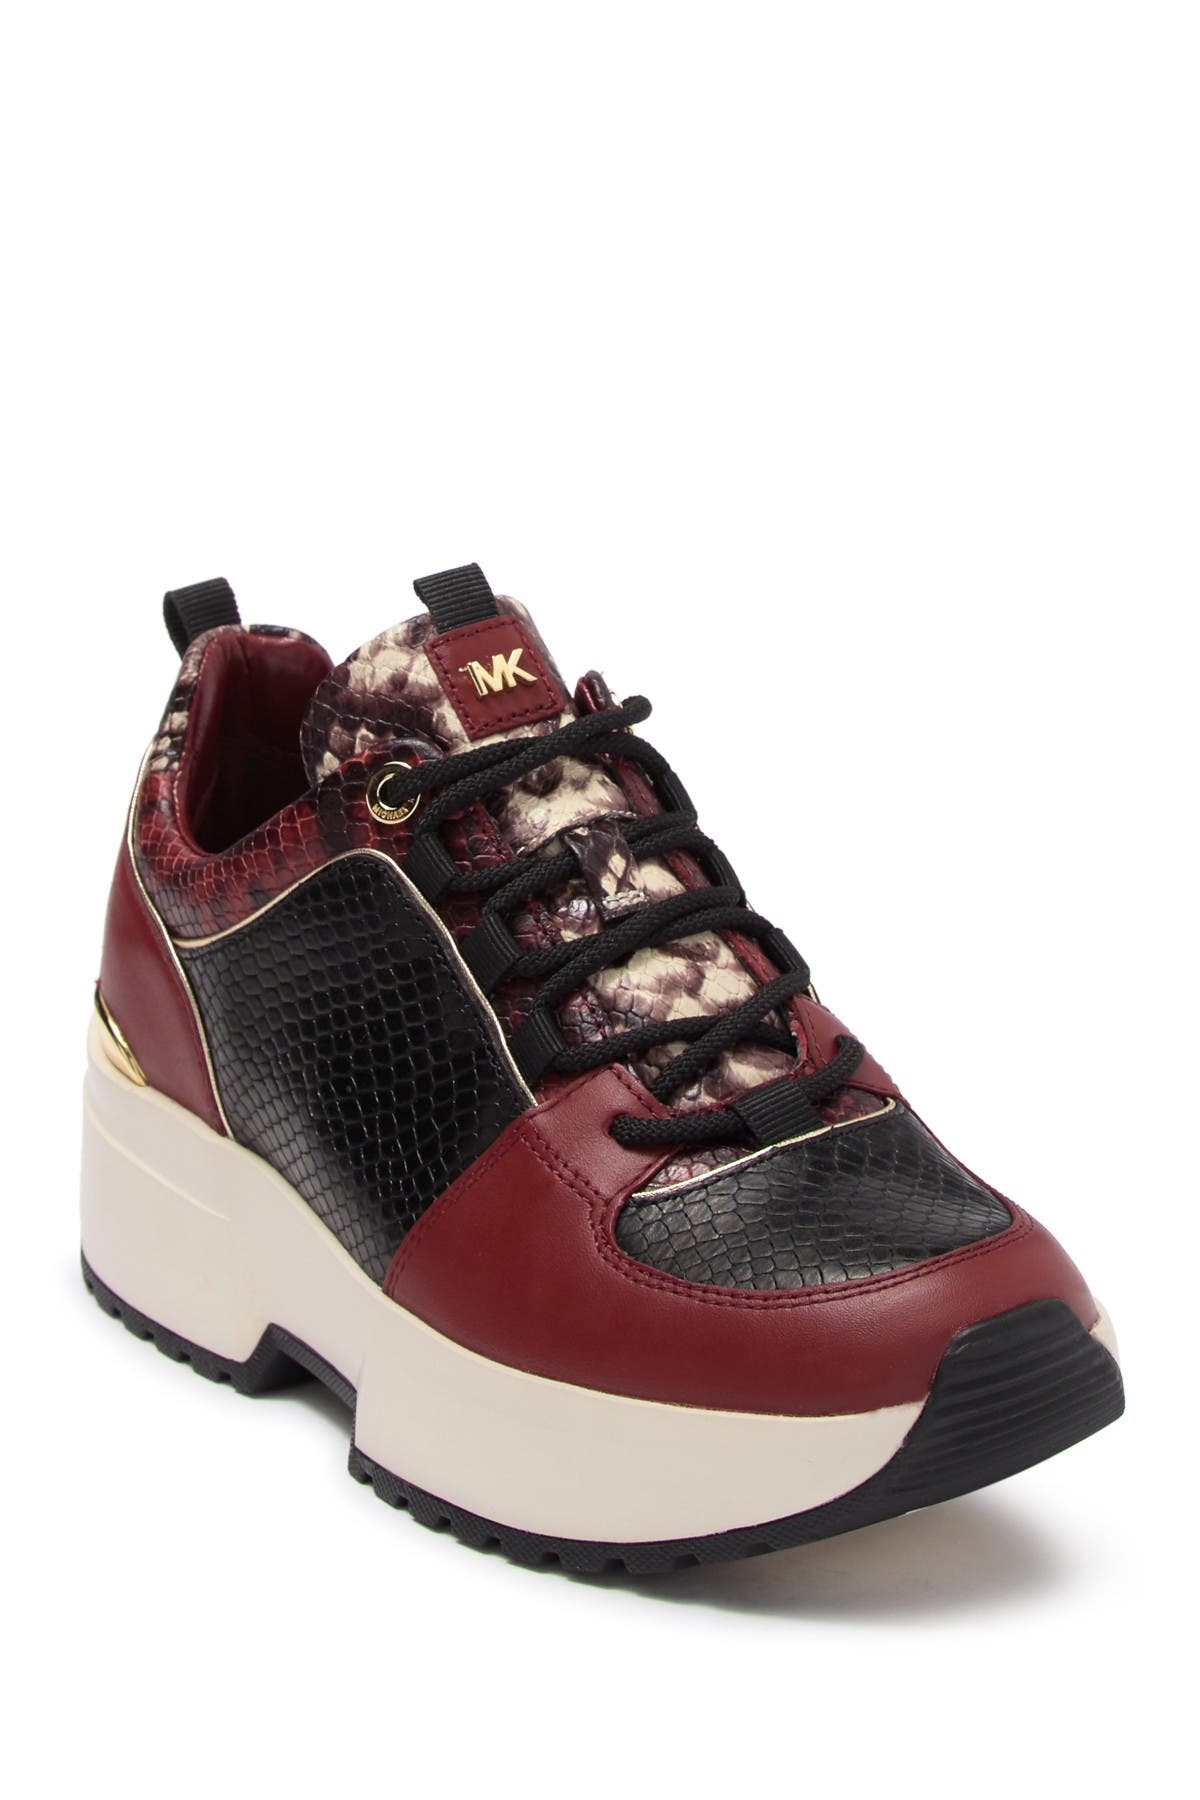 cosmo printed leather trainer michael kors